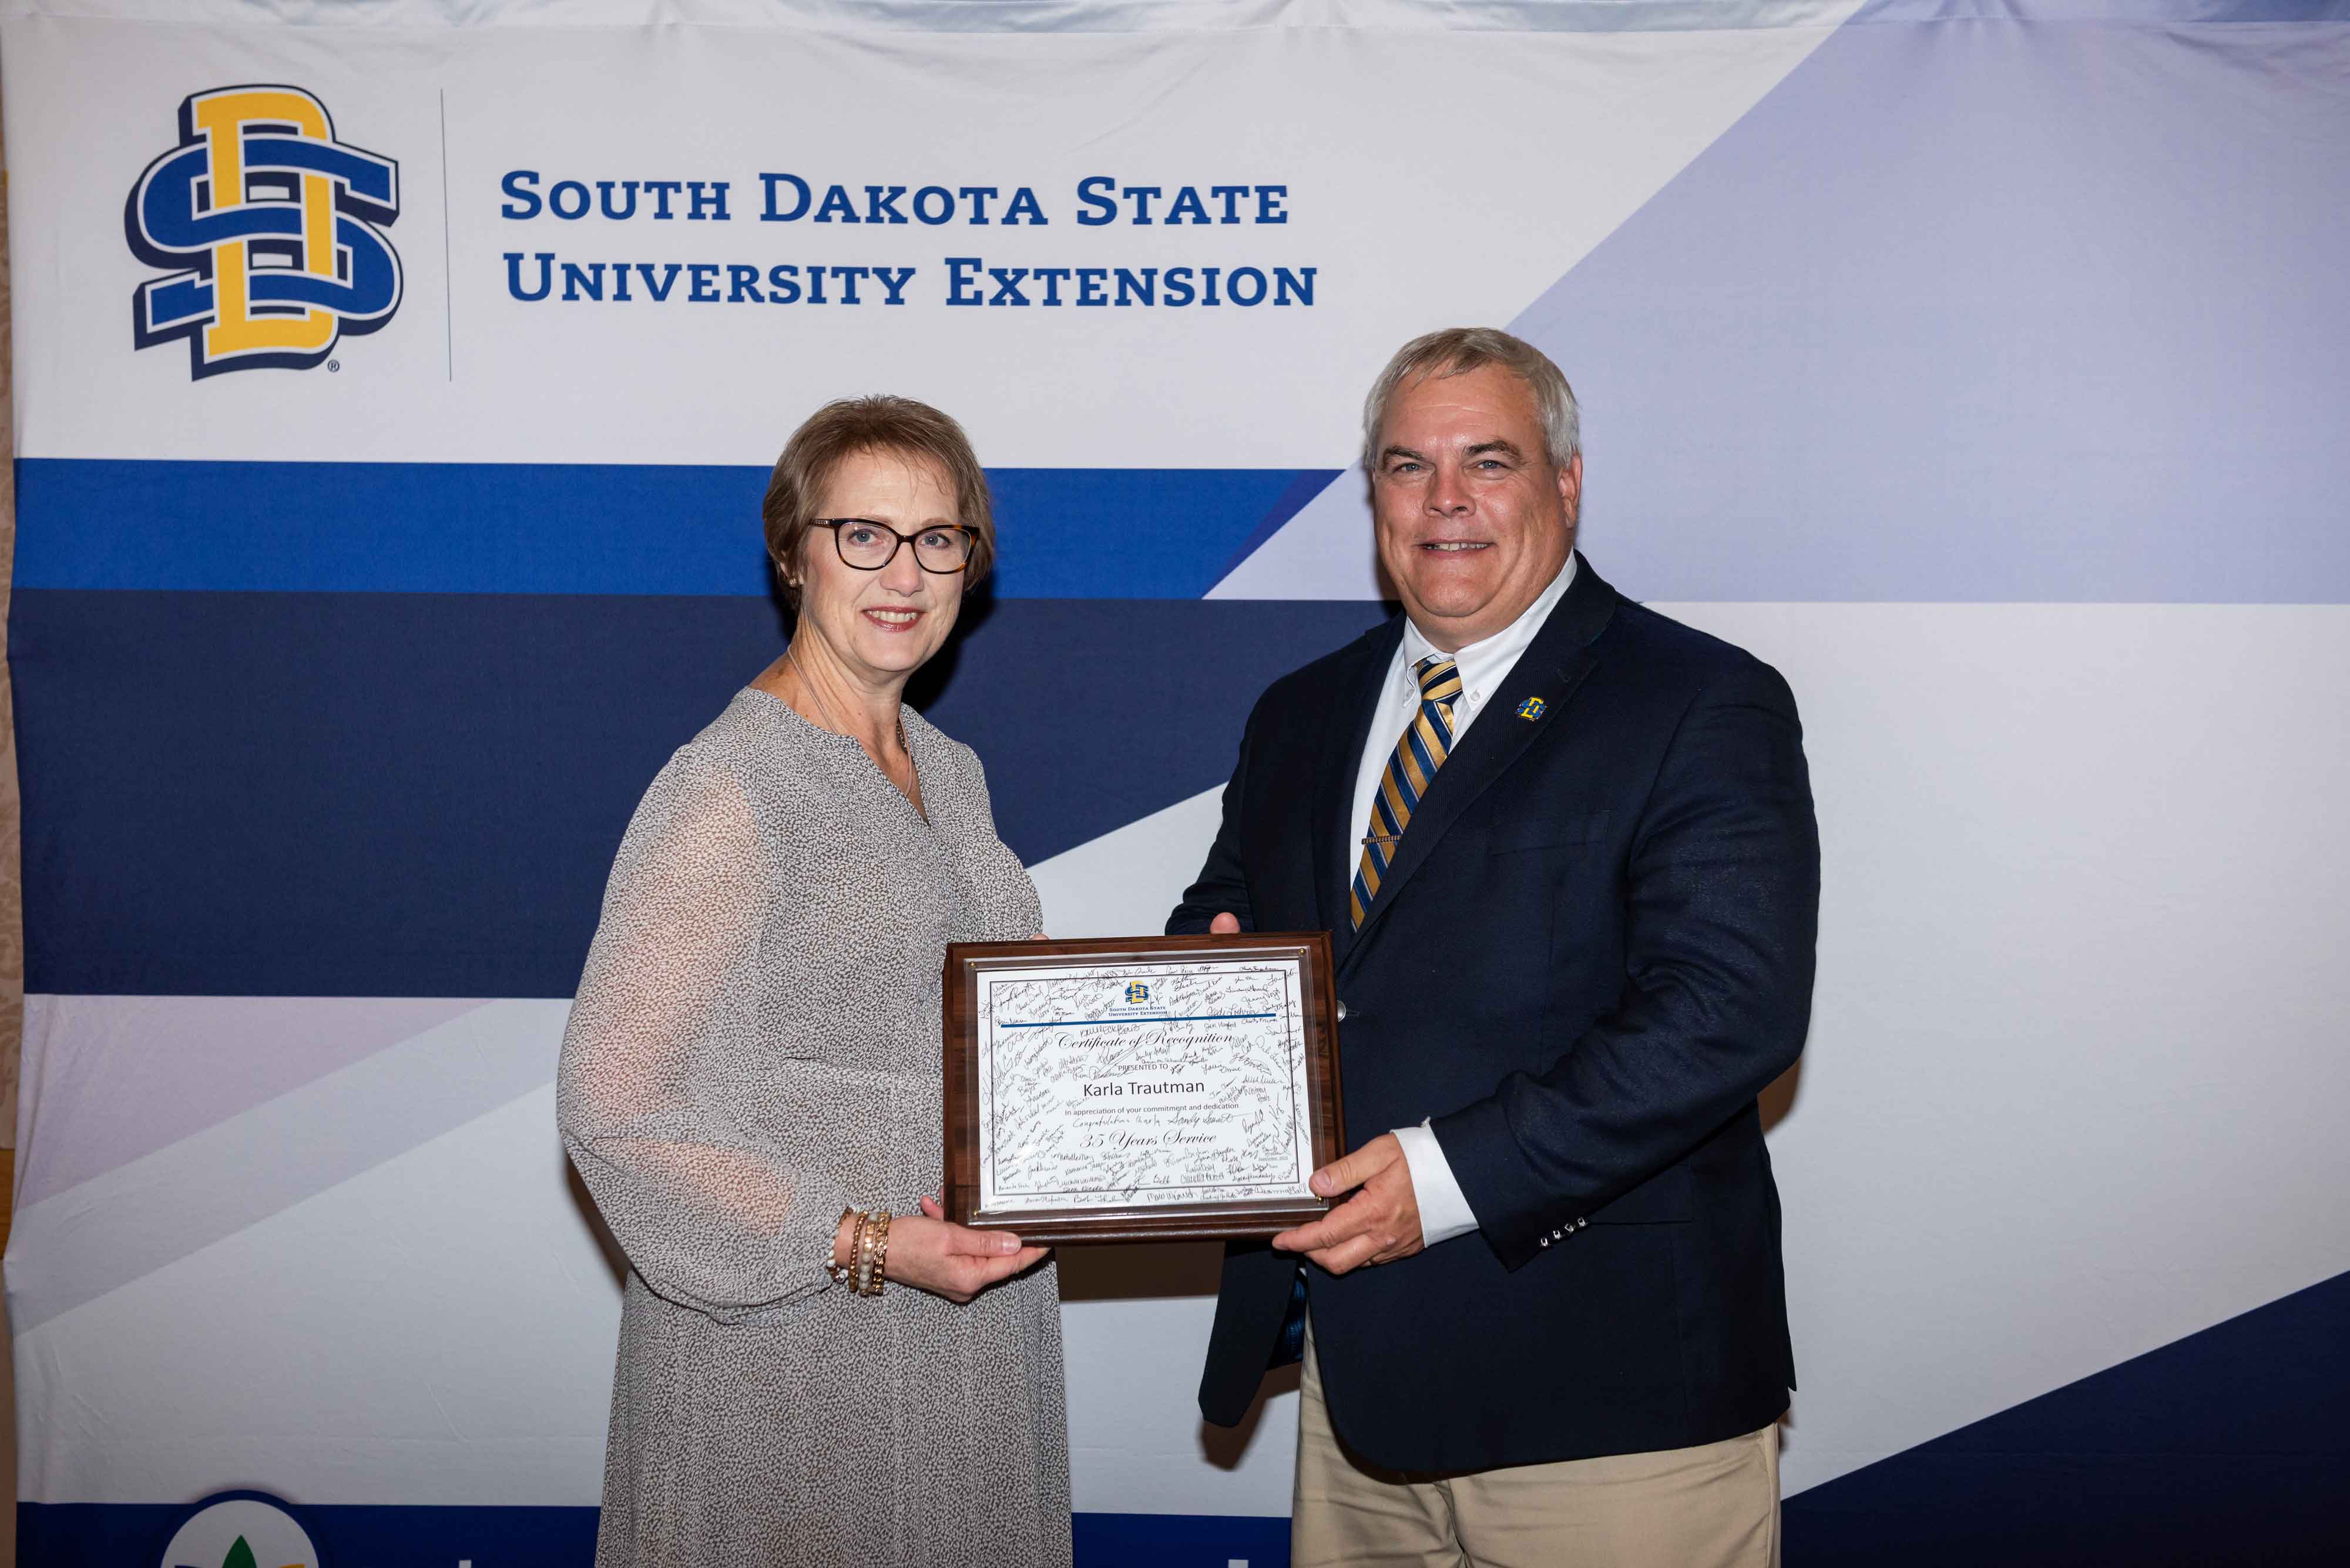 SDSU Extension Director Karla Trautman receives a certificate recognizing her 35 years with SDSU Extension from Joseph Cassady, South Dakota Corn Endowed Dean of the College of Agriculture, Food and Environmental Sciences at SDSU